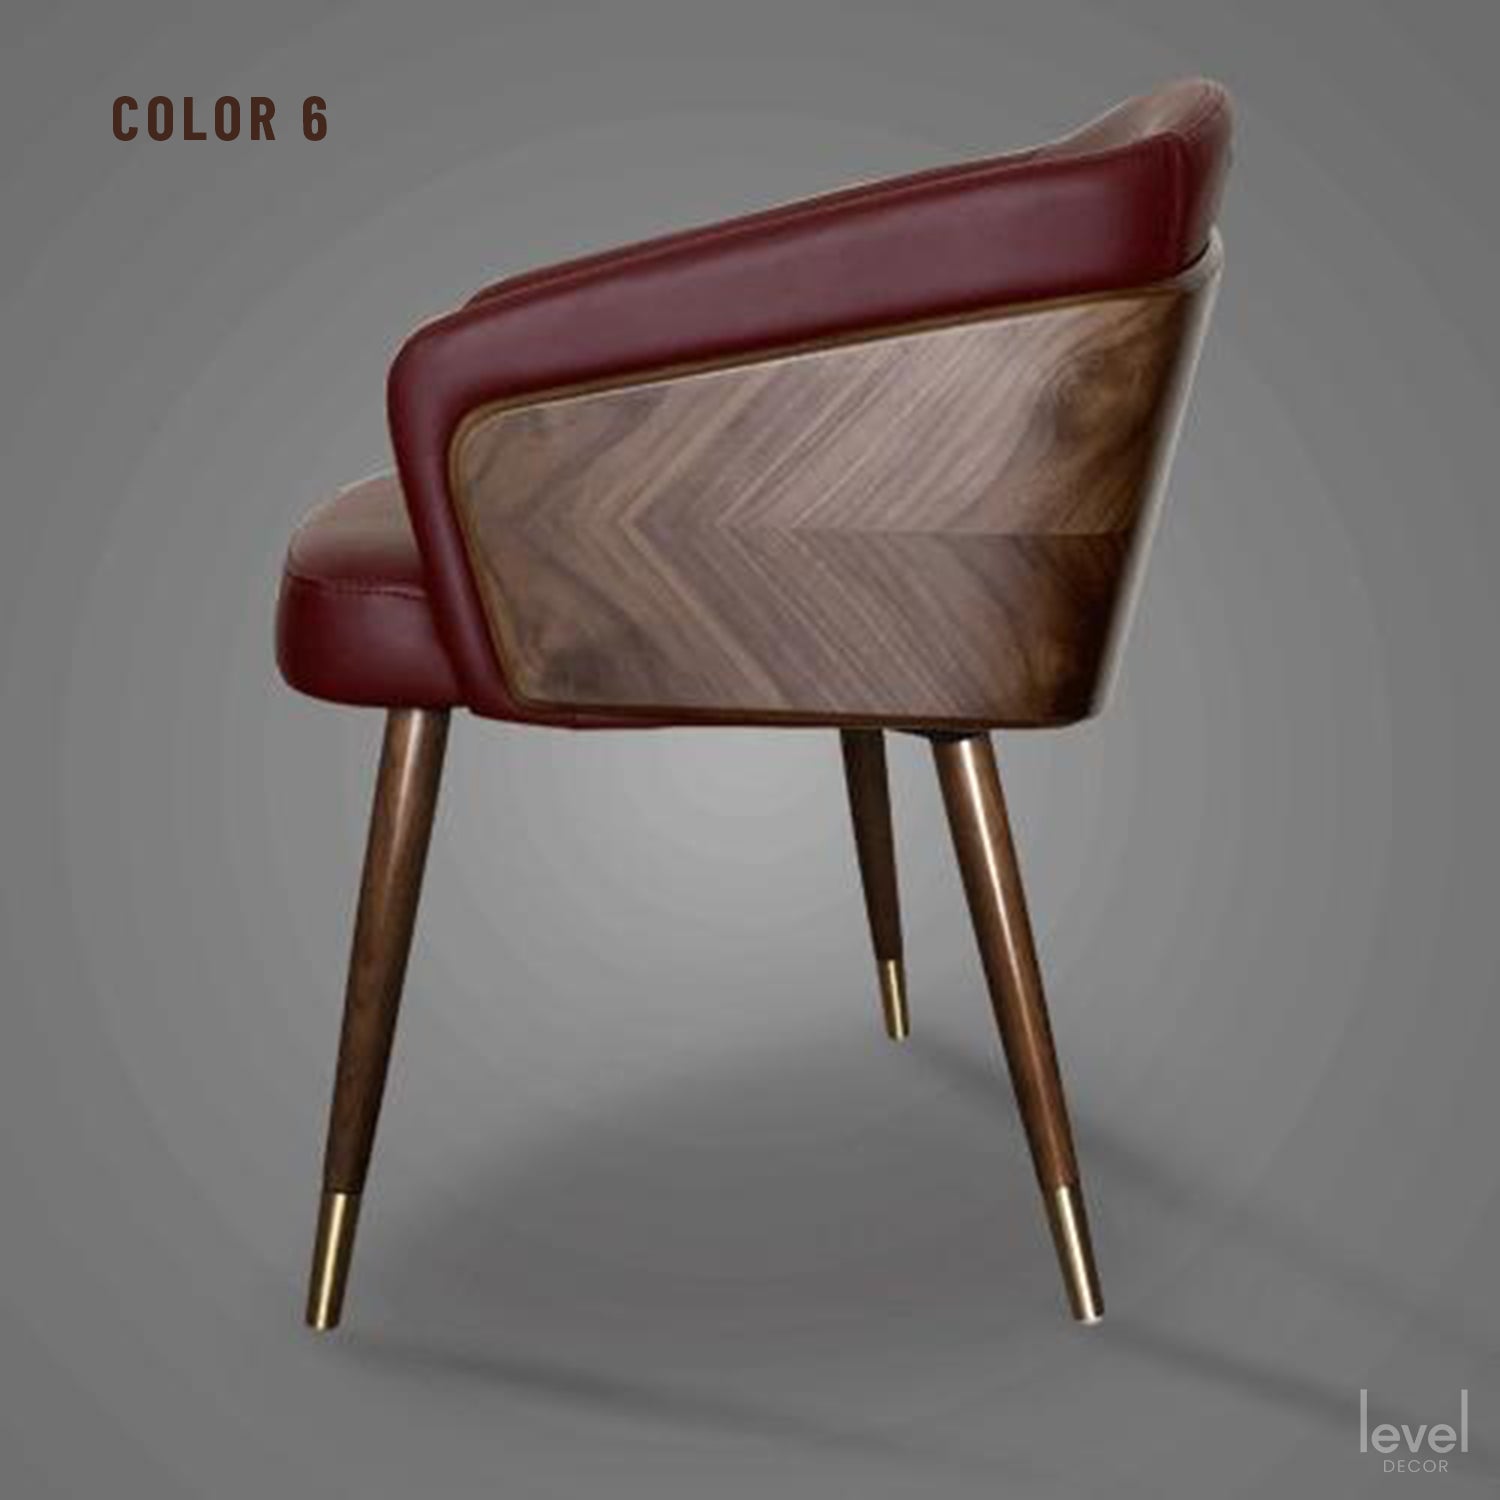 Modern Solid Wood Leisure Chairs - Color 6 - Level Decor